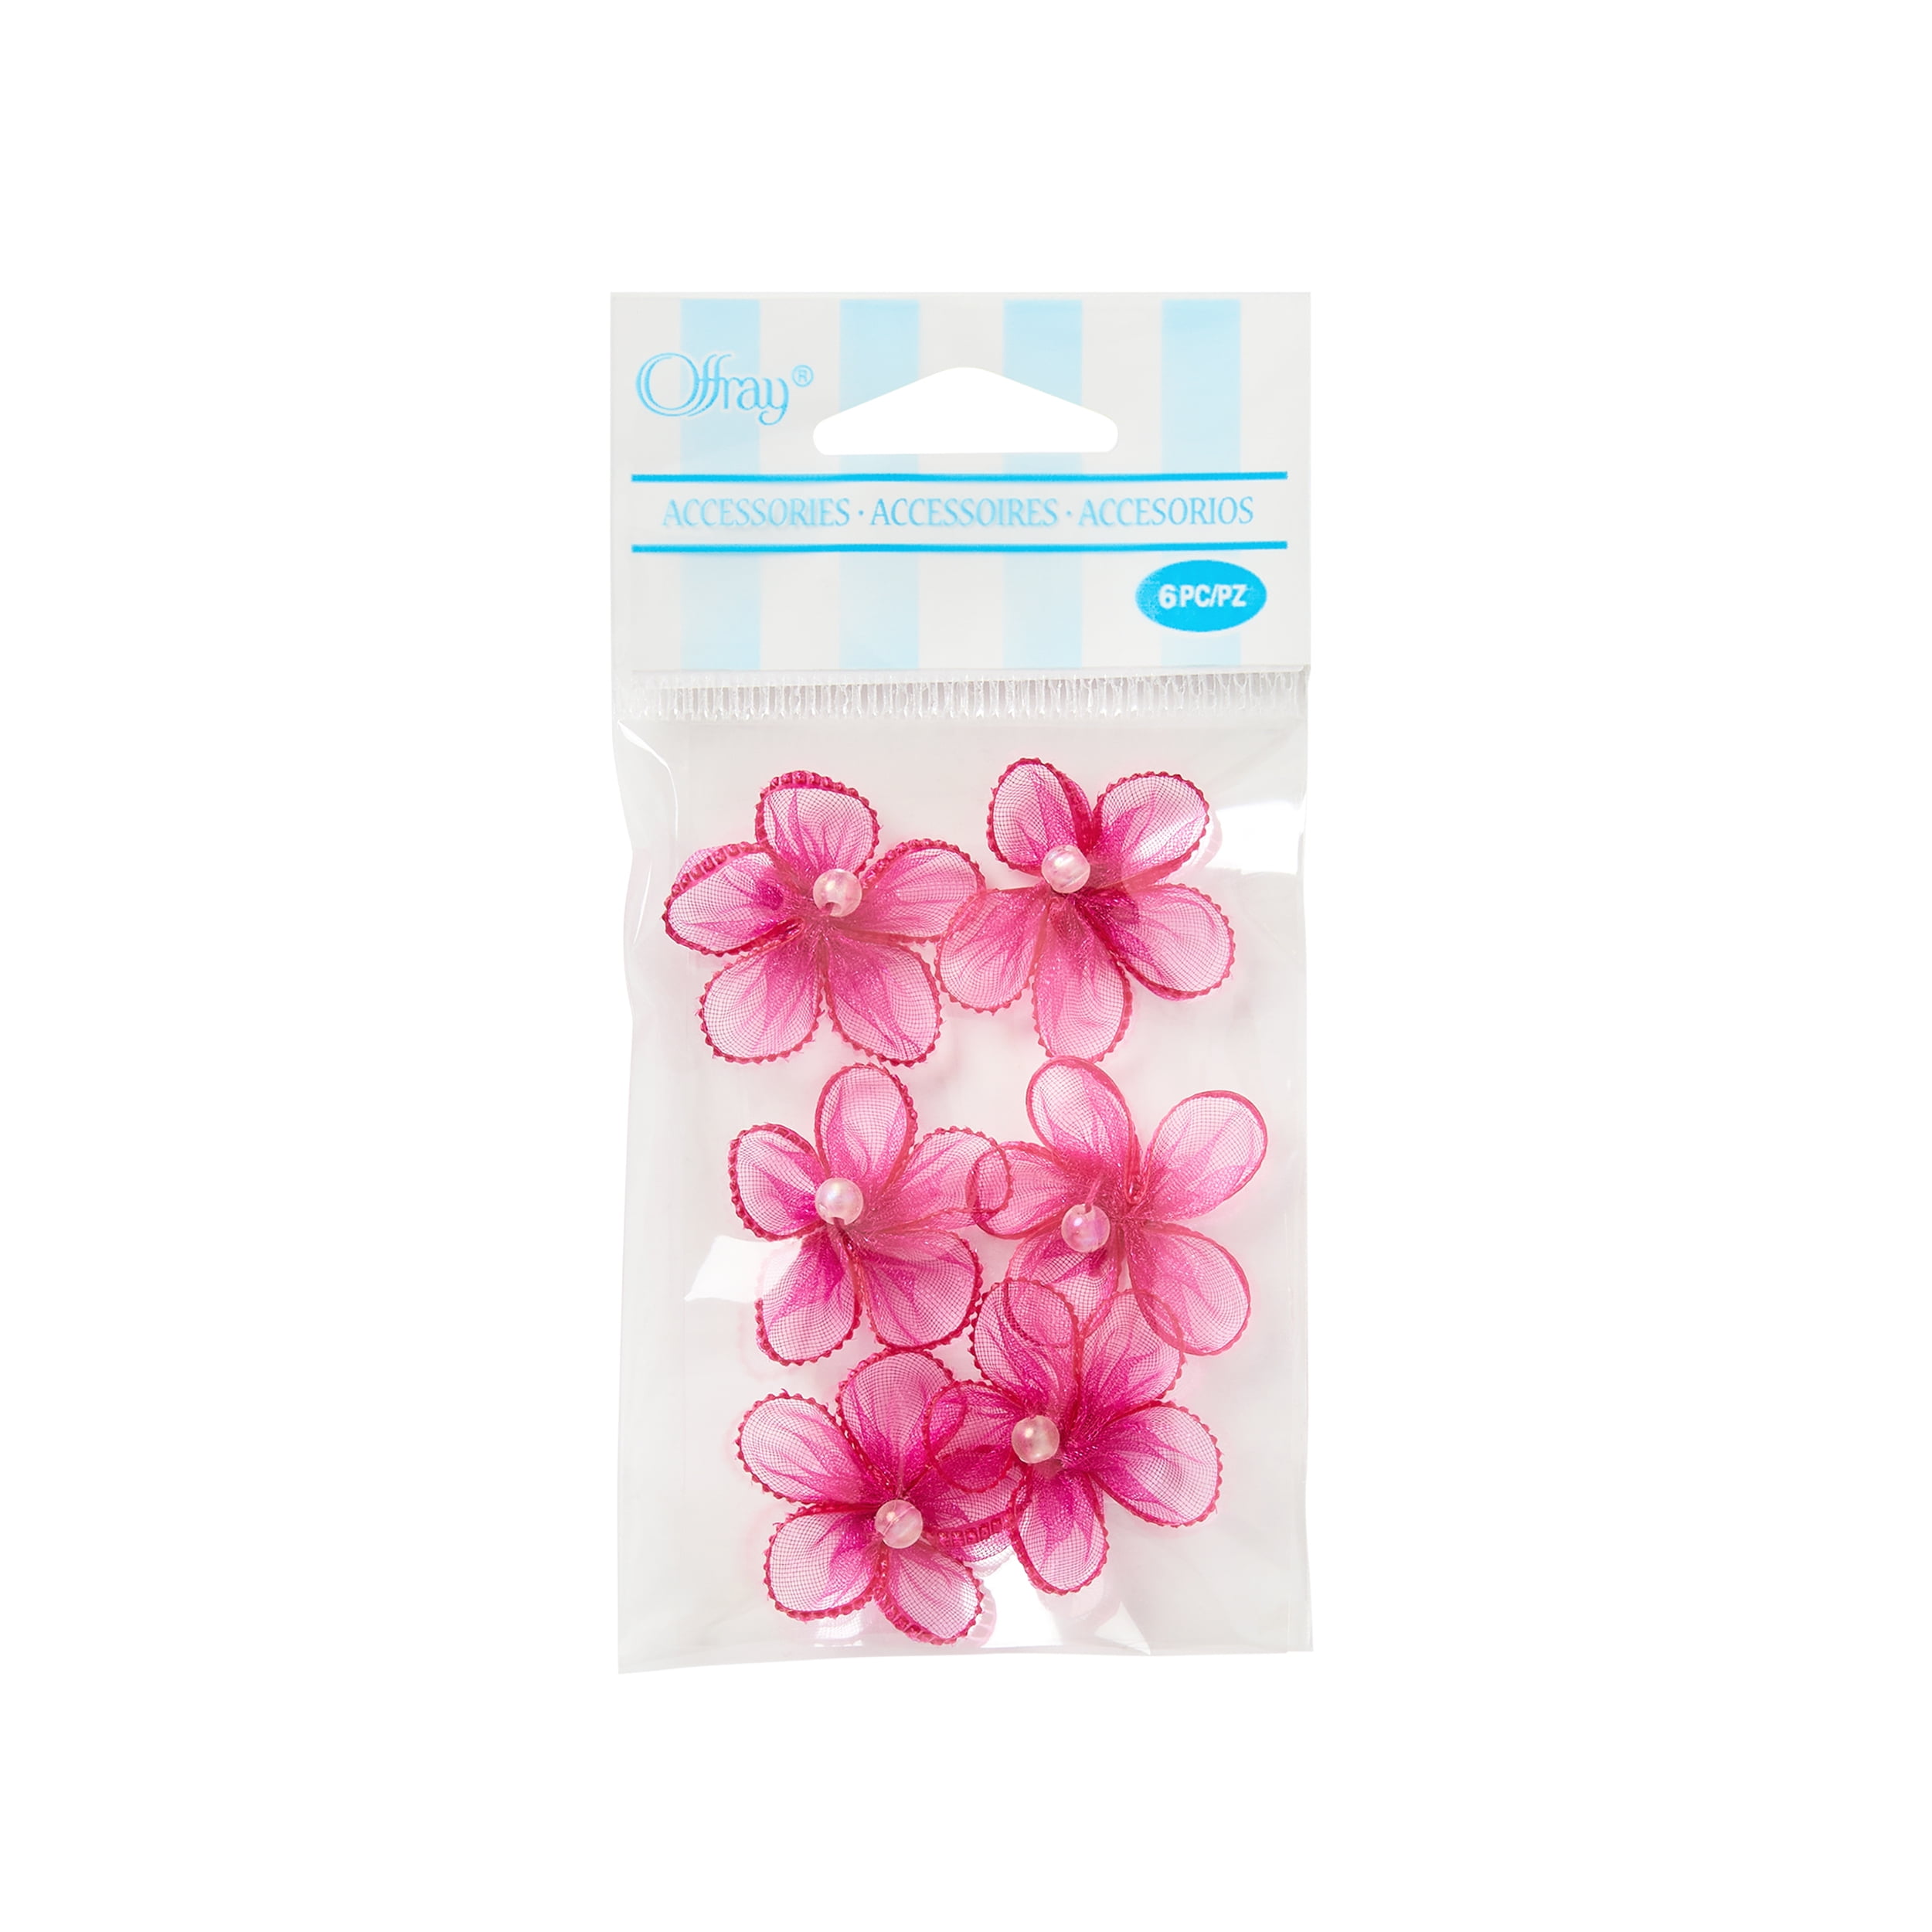 Offray Accessories, Hot Pink 3/4 inch 5 Petal Sheer Flower with Pearl Accessory for Wedding, Hair Clips, and Scrapbooking, 6 count, 1 Package